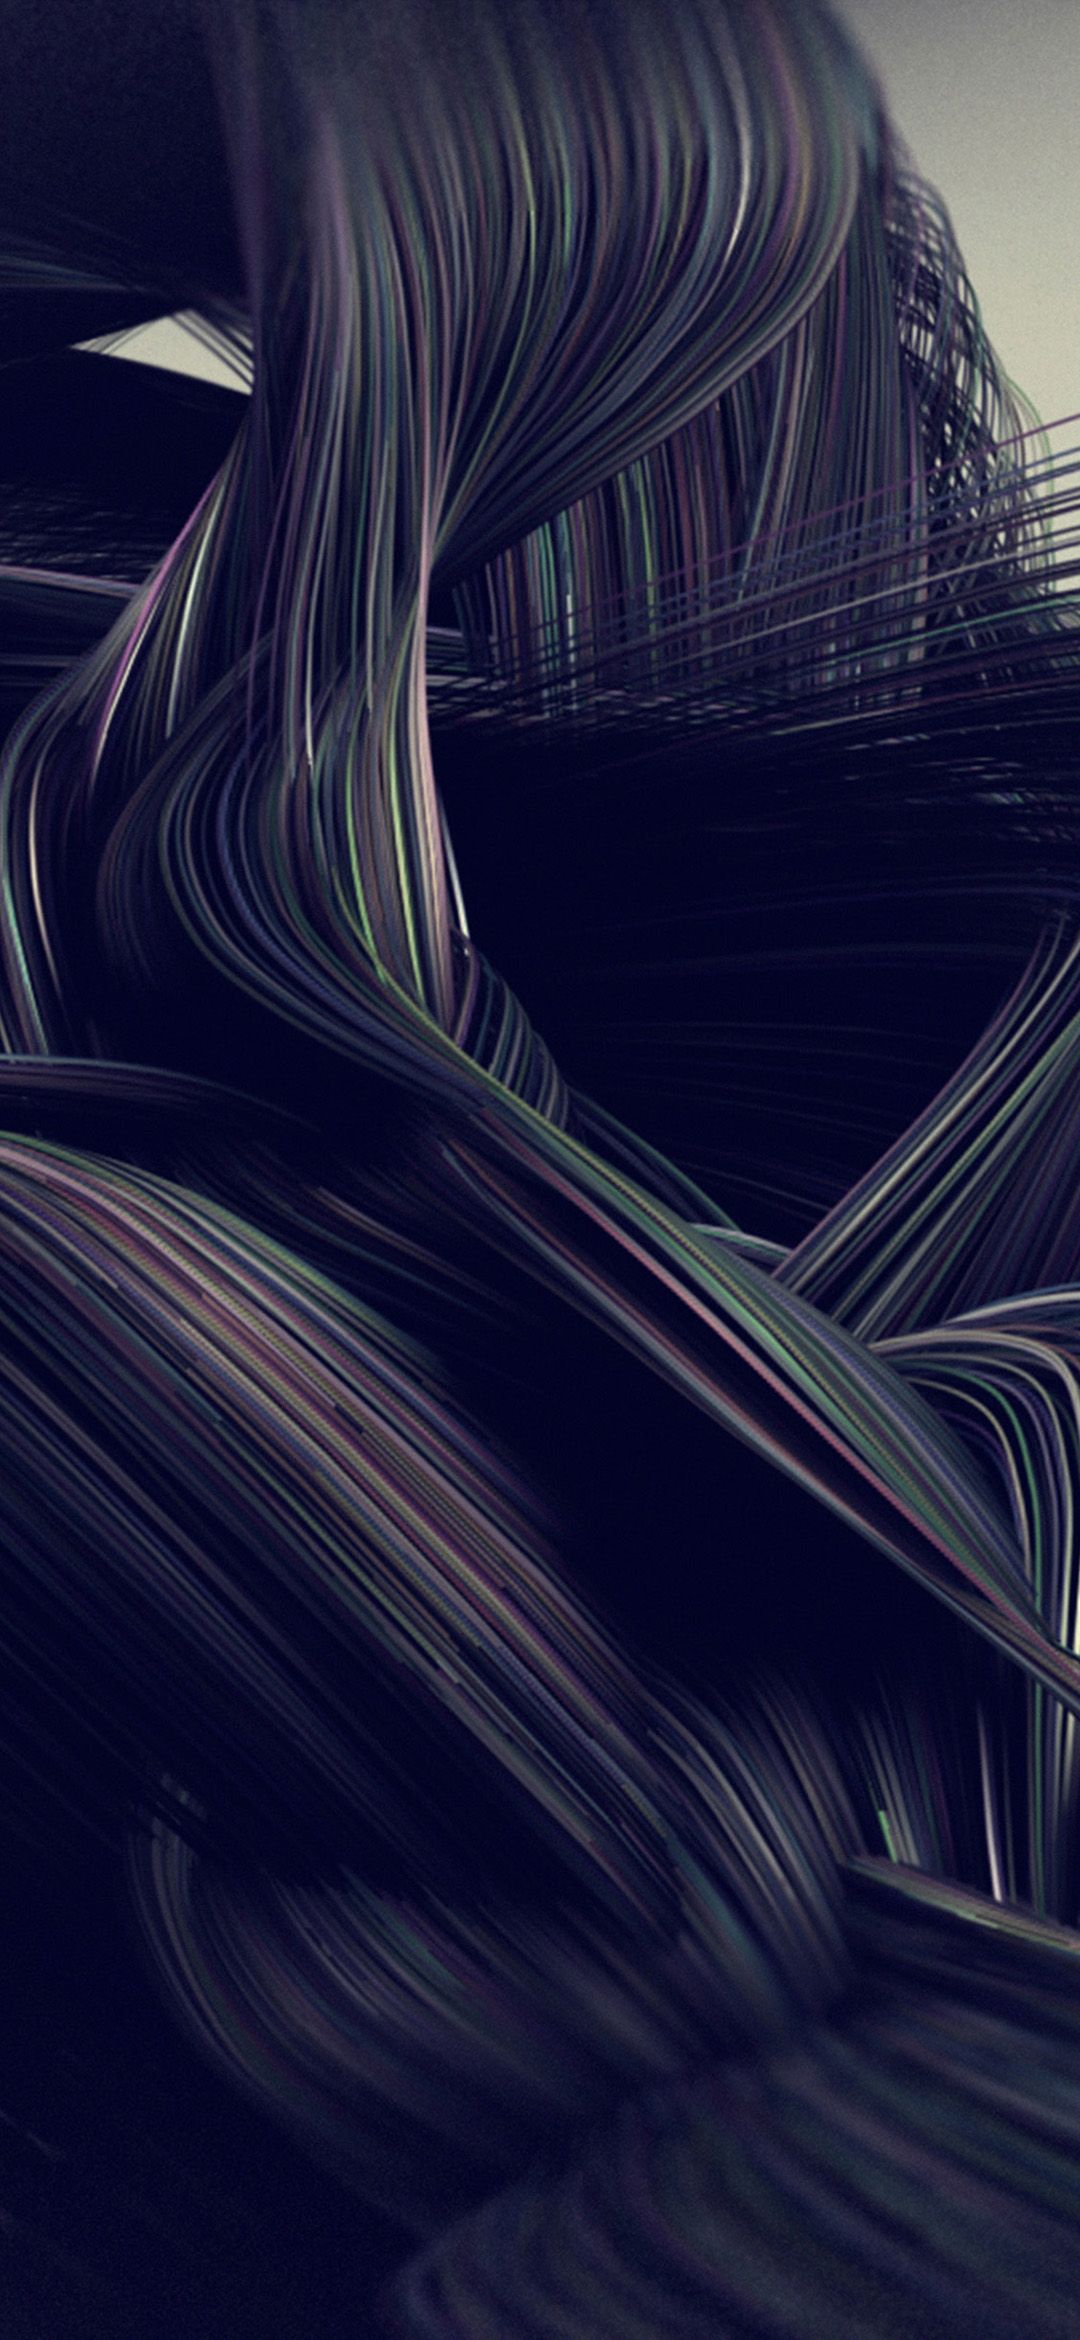 Free download Huawei P30 And P30 Pro Wallpaper S10 Abstract Wallpaper Samsung [1080x2340] for your Desktop, Mobile & Tablet. Explore P30 Wallpaper. P30 Wallpaper, HUAWEI P30 Pro Wallpaper